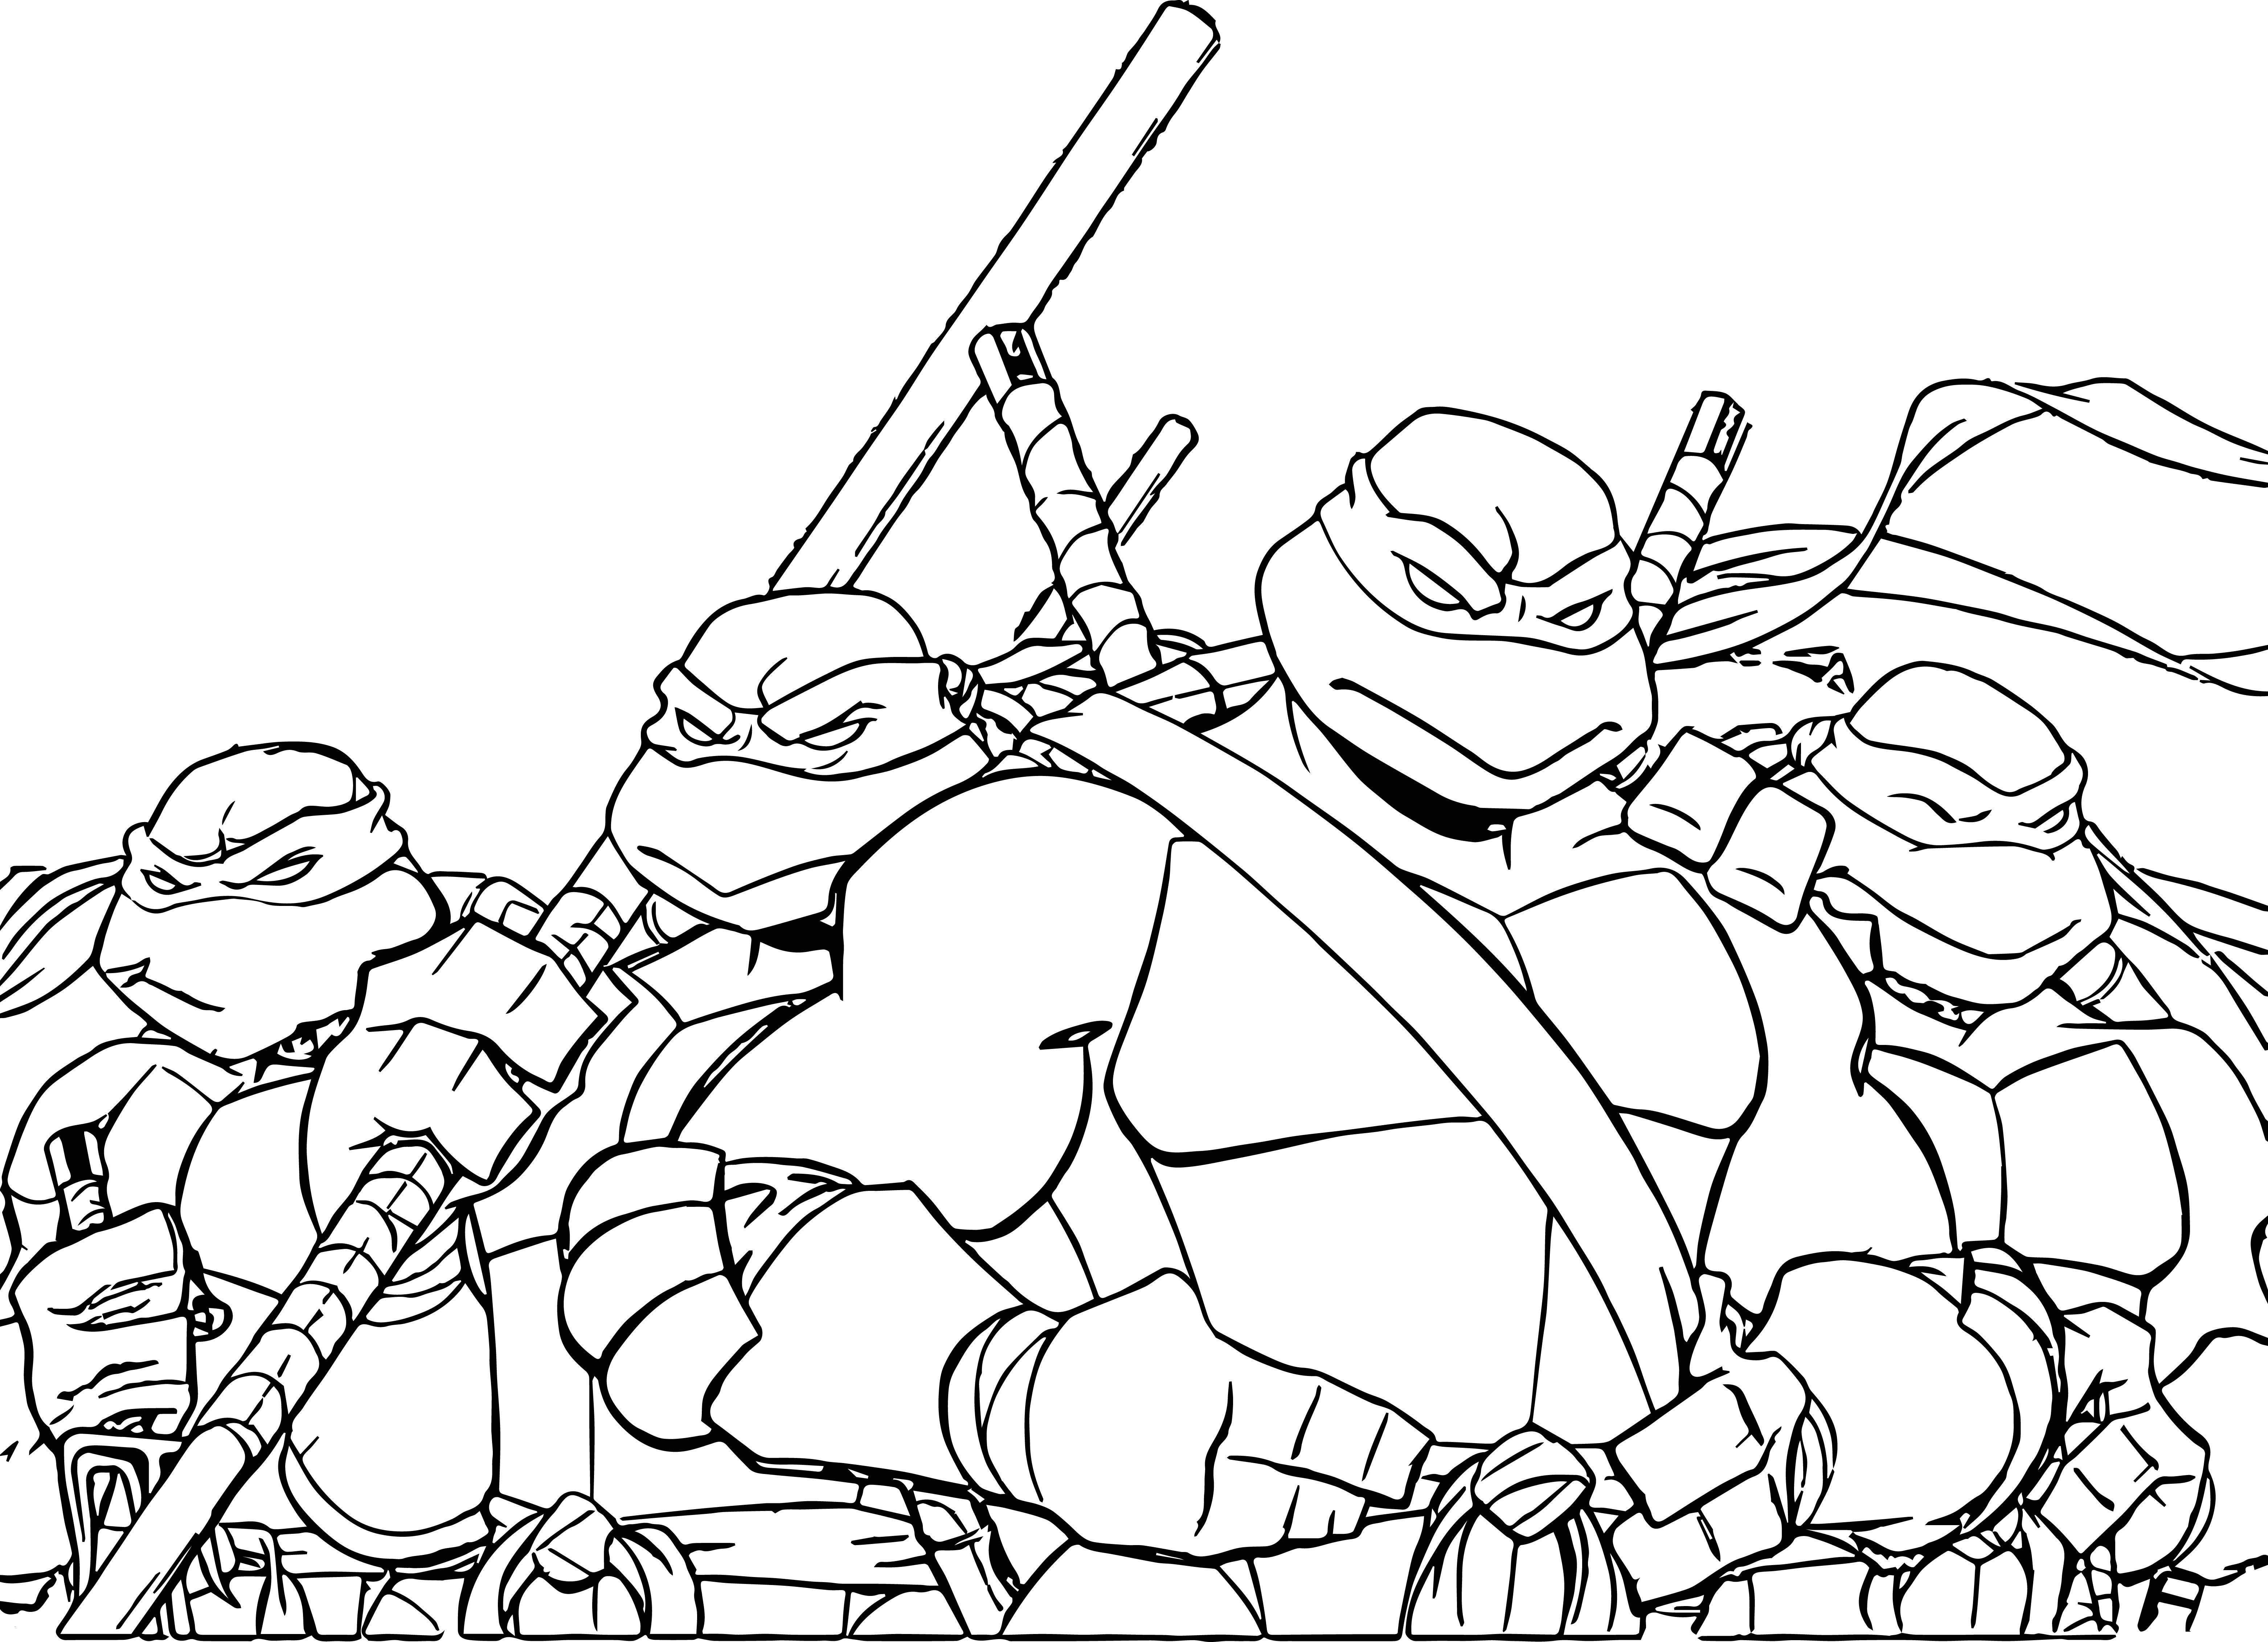 Ninja Turtle Mask Coloring Page Coloring Books Ninja Turtles Coloring Pages Teenage Mutant